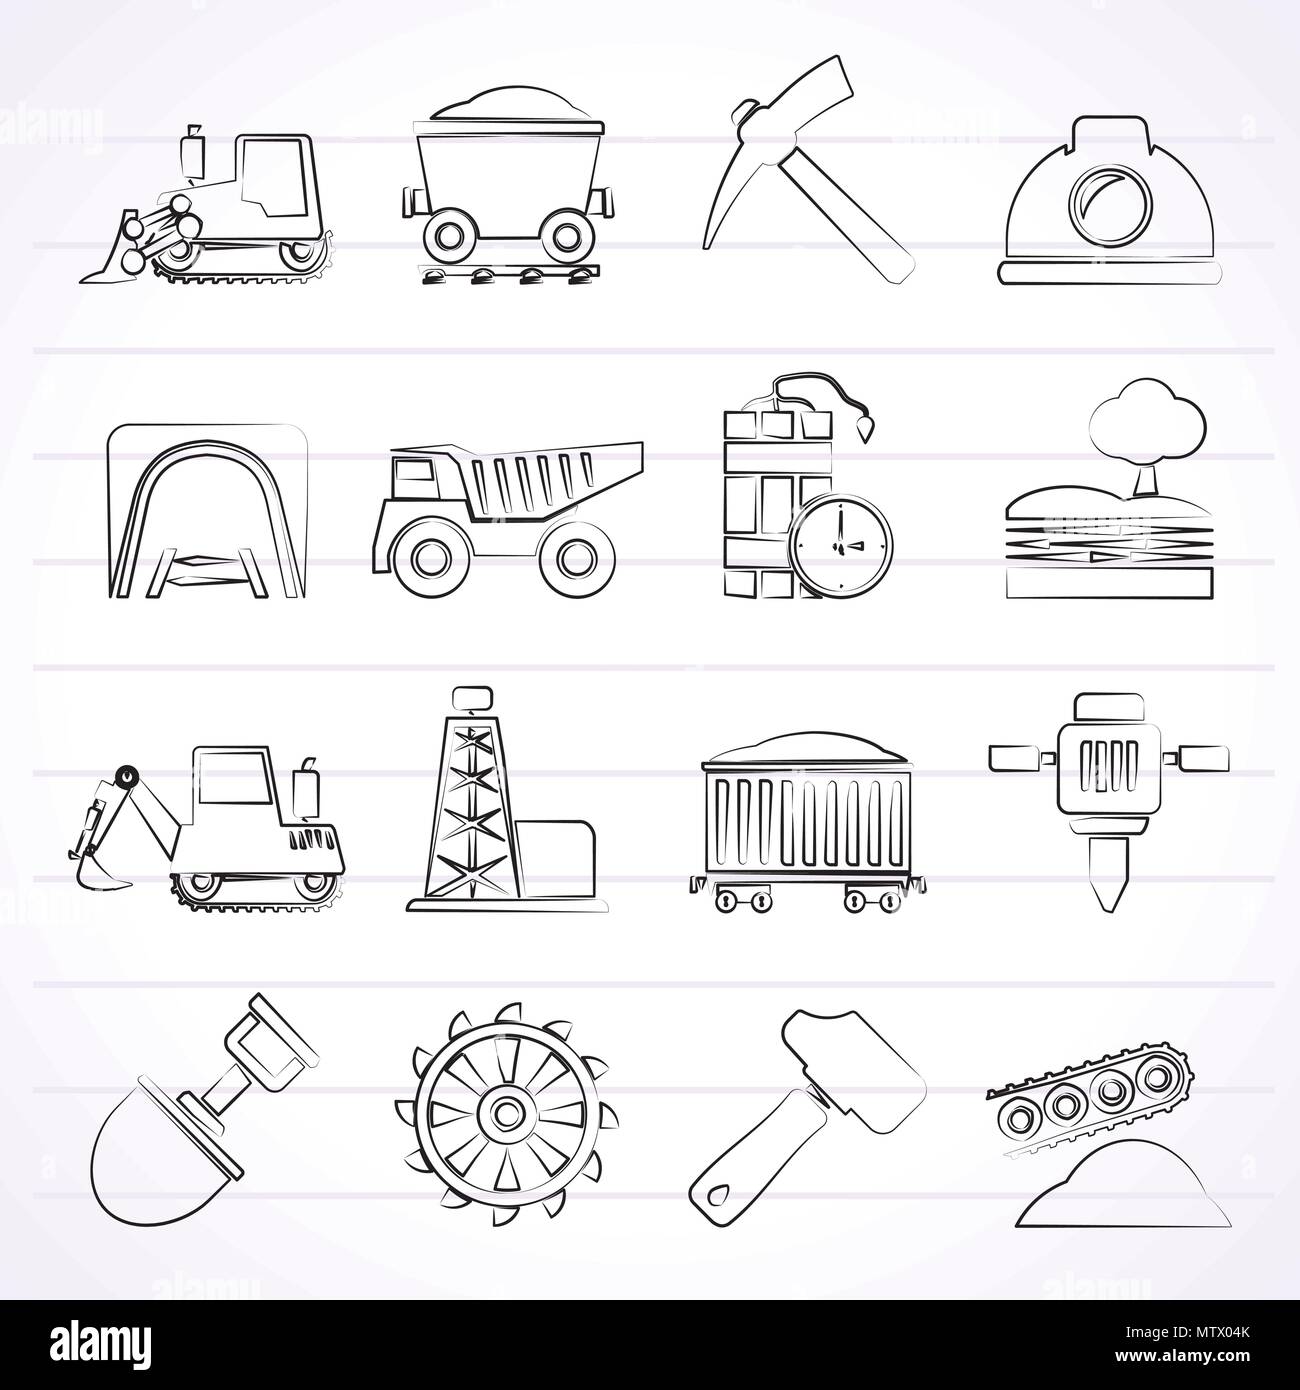 Mining and quarrying industry icons - vector icon set Stock Vector